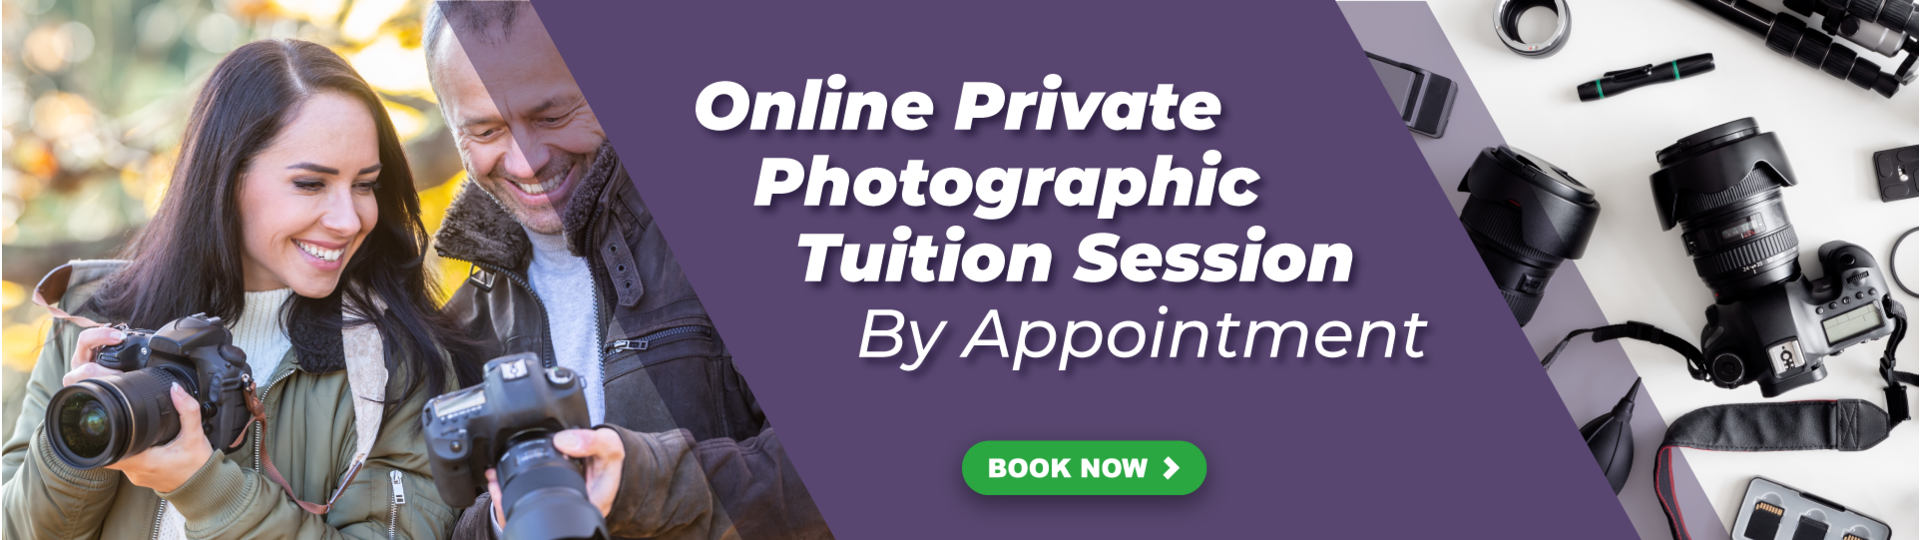    Online Private Photographic Tuition